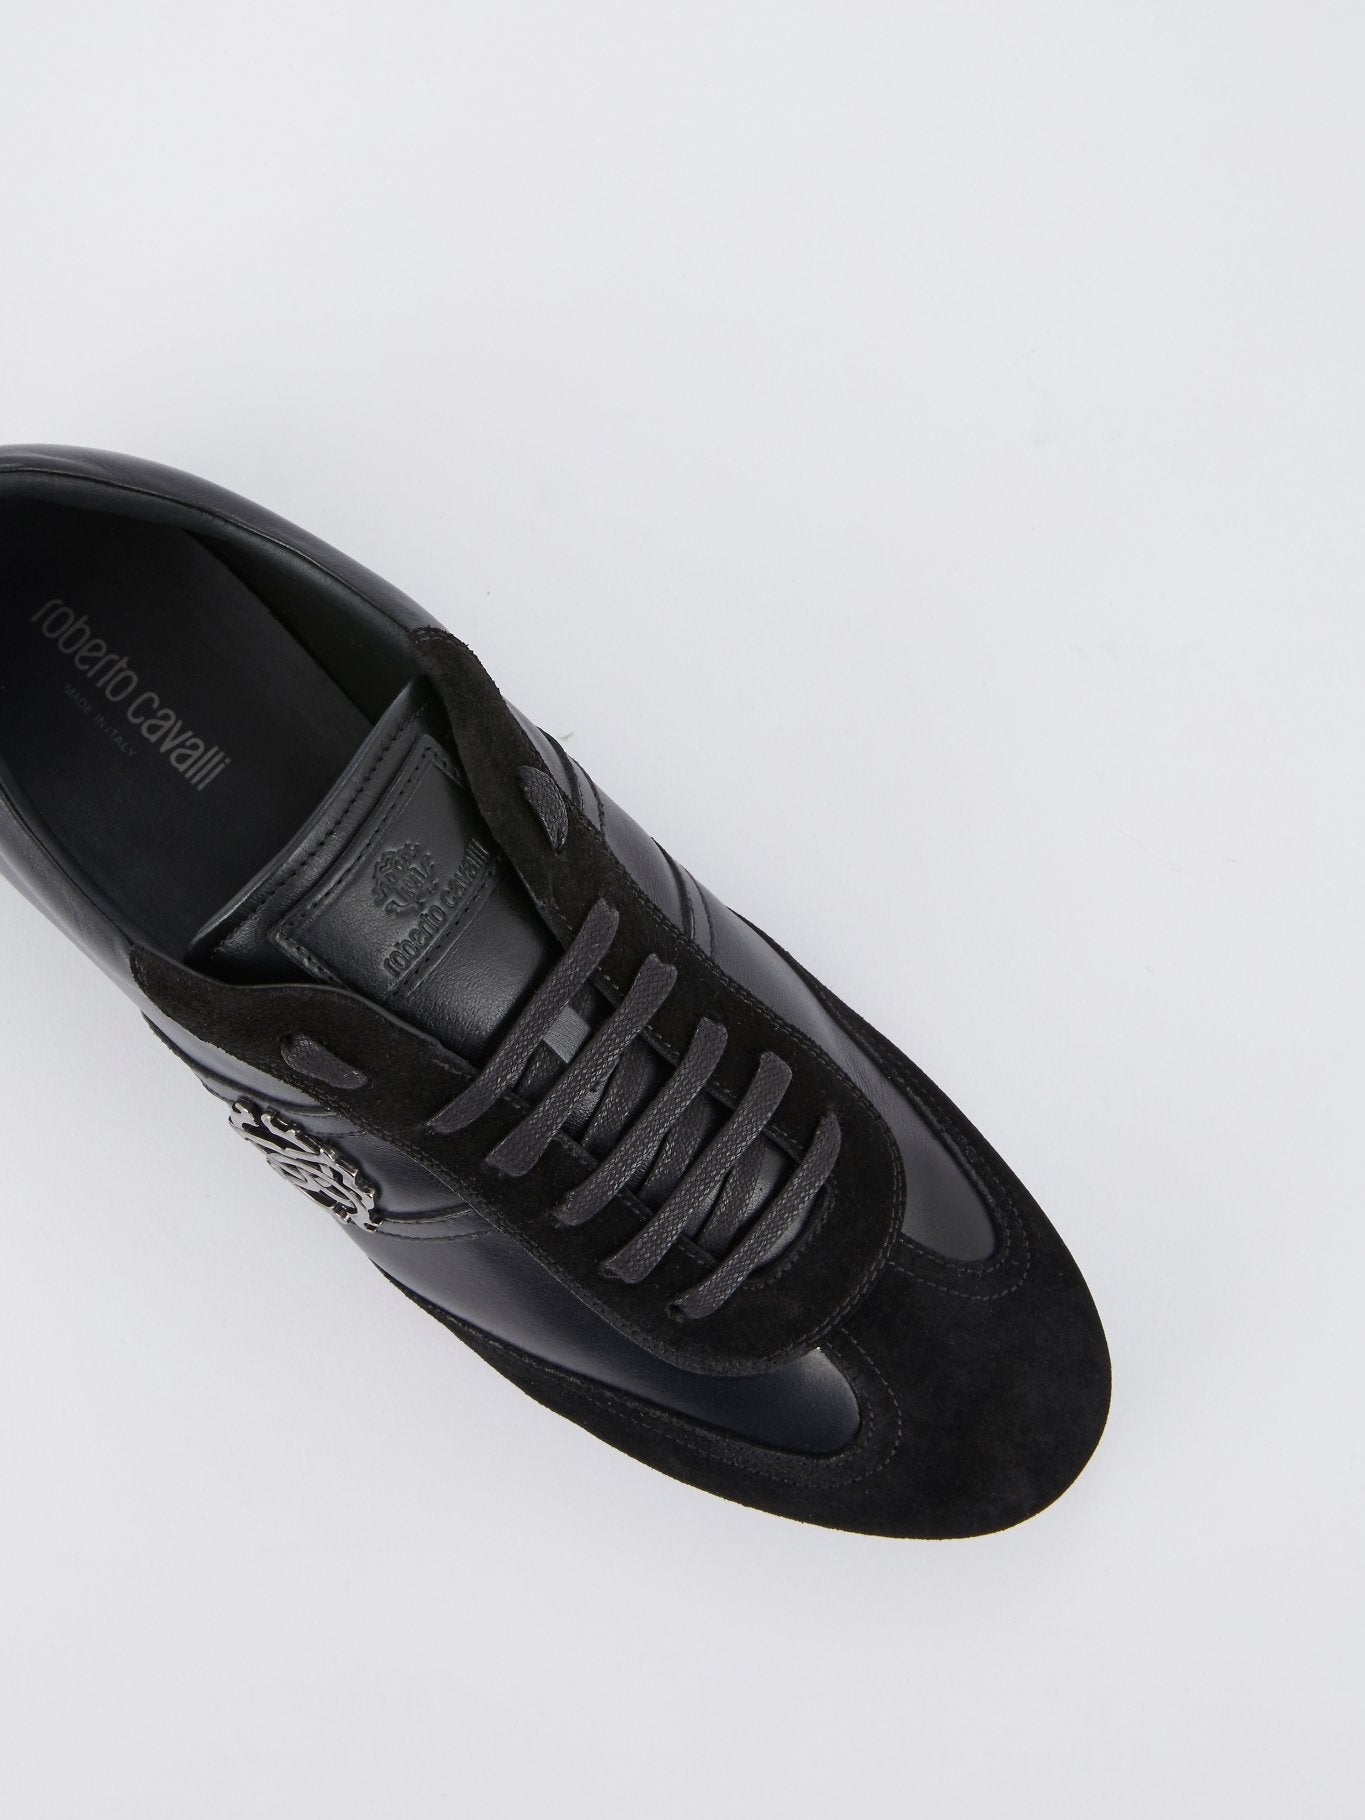 Black Suede Panel Leather Sneakers